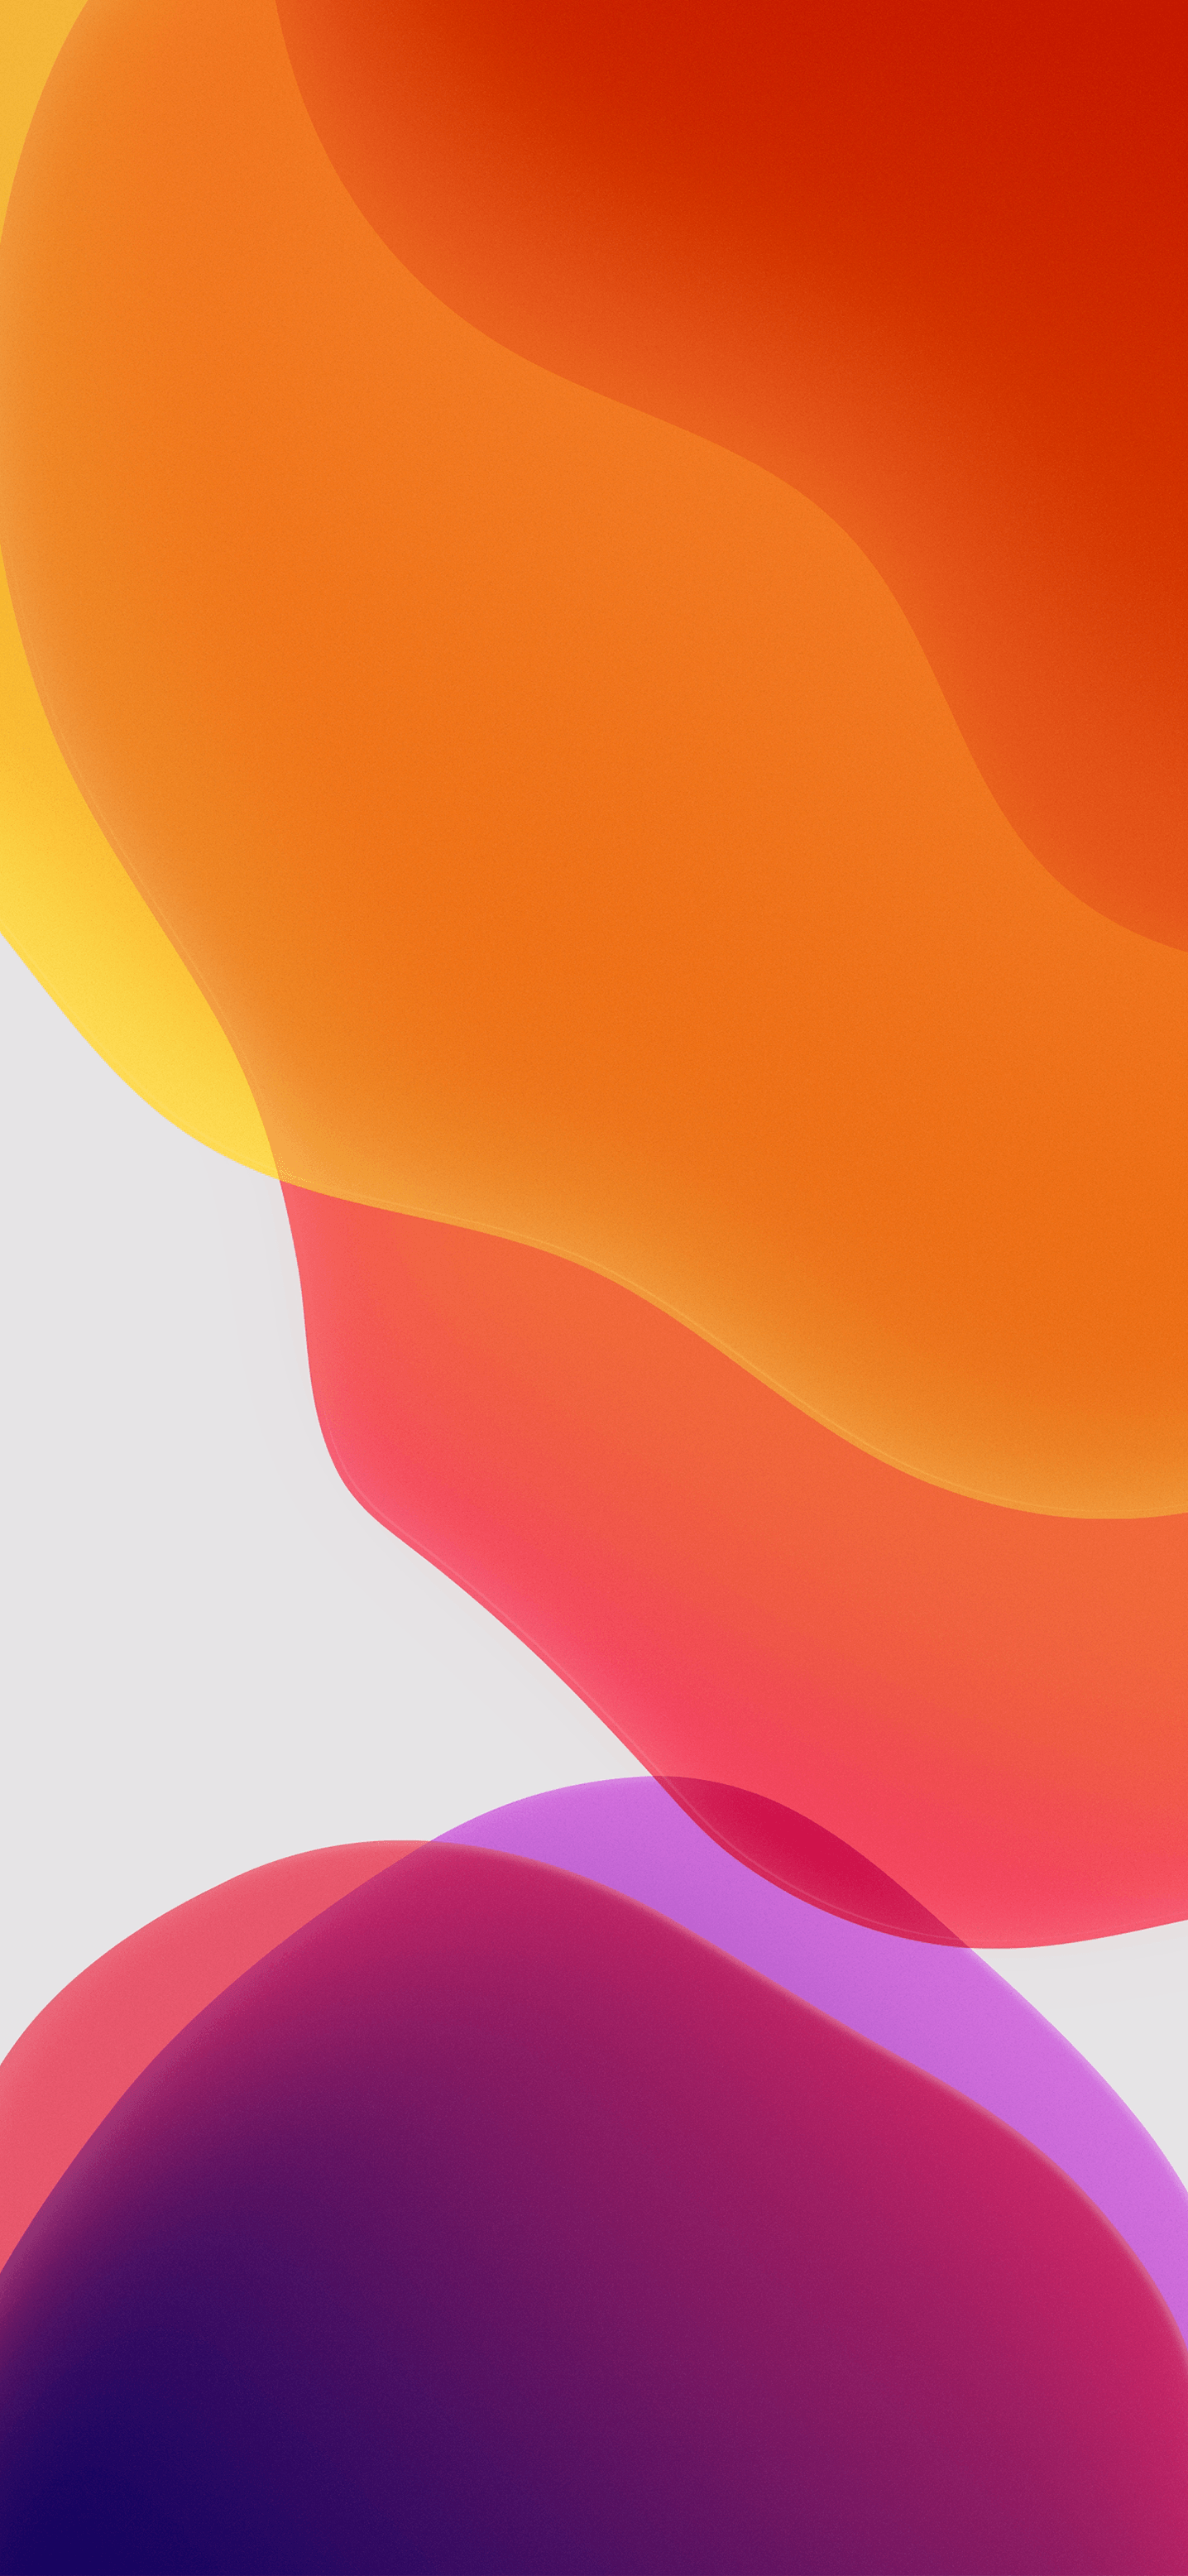 iOS 13 Wallpapers